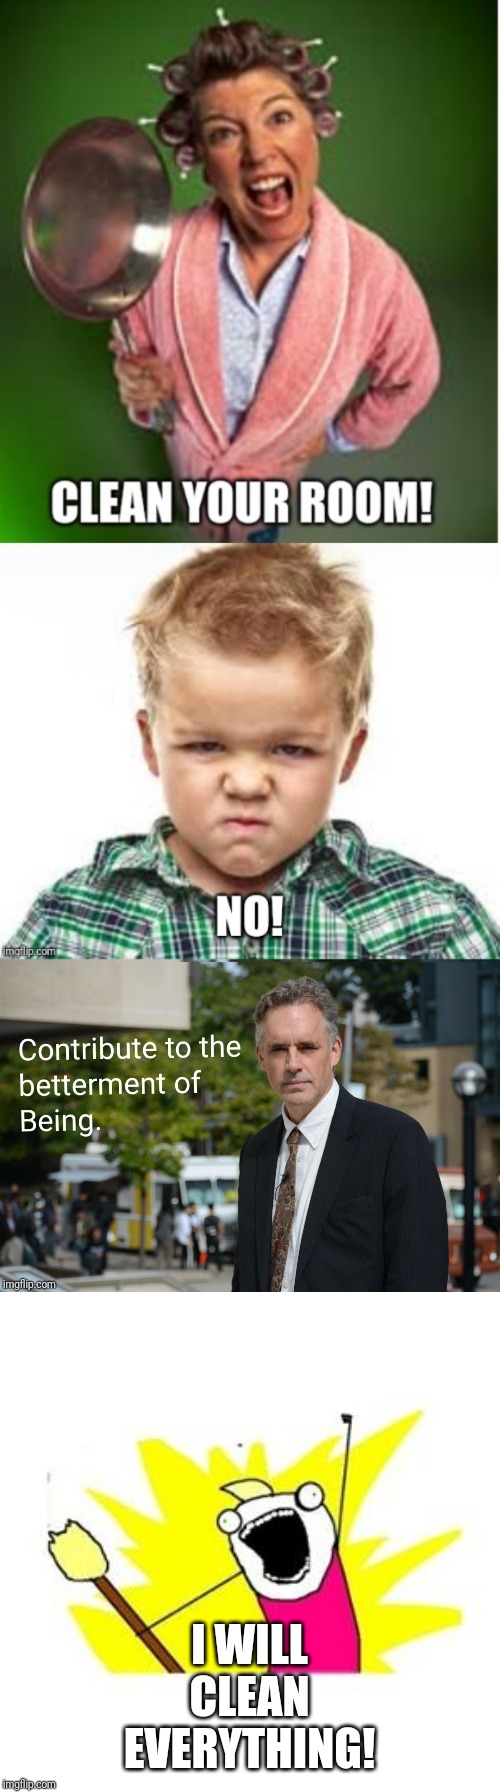 True Motivation | I WILL CLEAN EVERYTHING! | image tagged in clean all the things,jordan peterson,mom,kid,cleaning | made w/ Imgflip meme maker